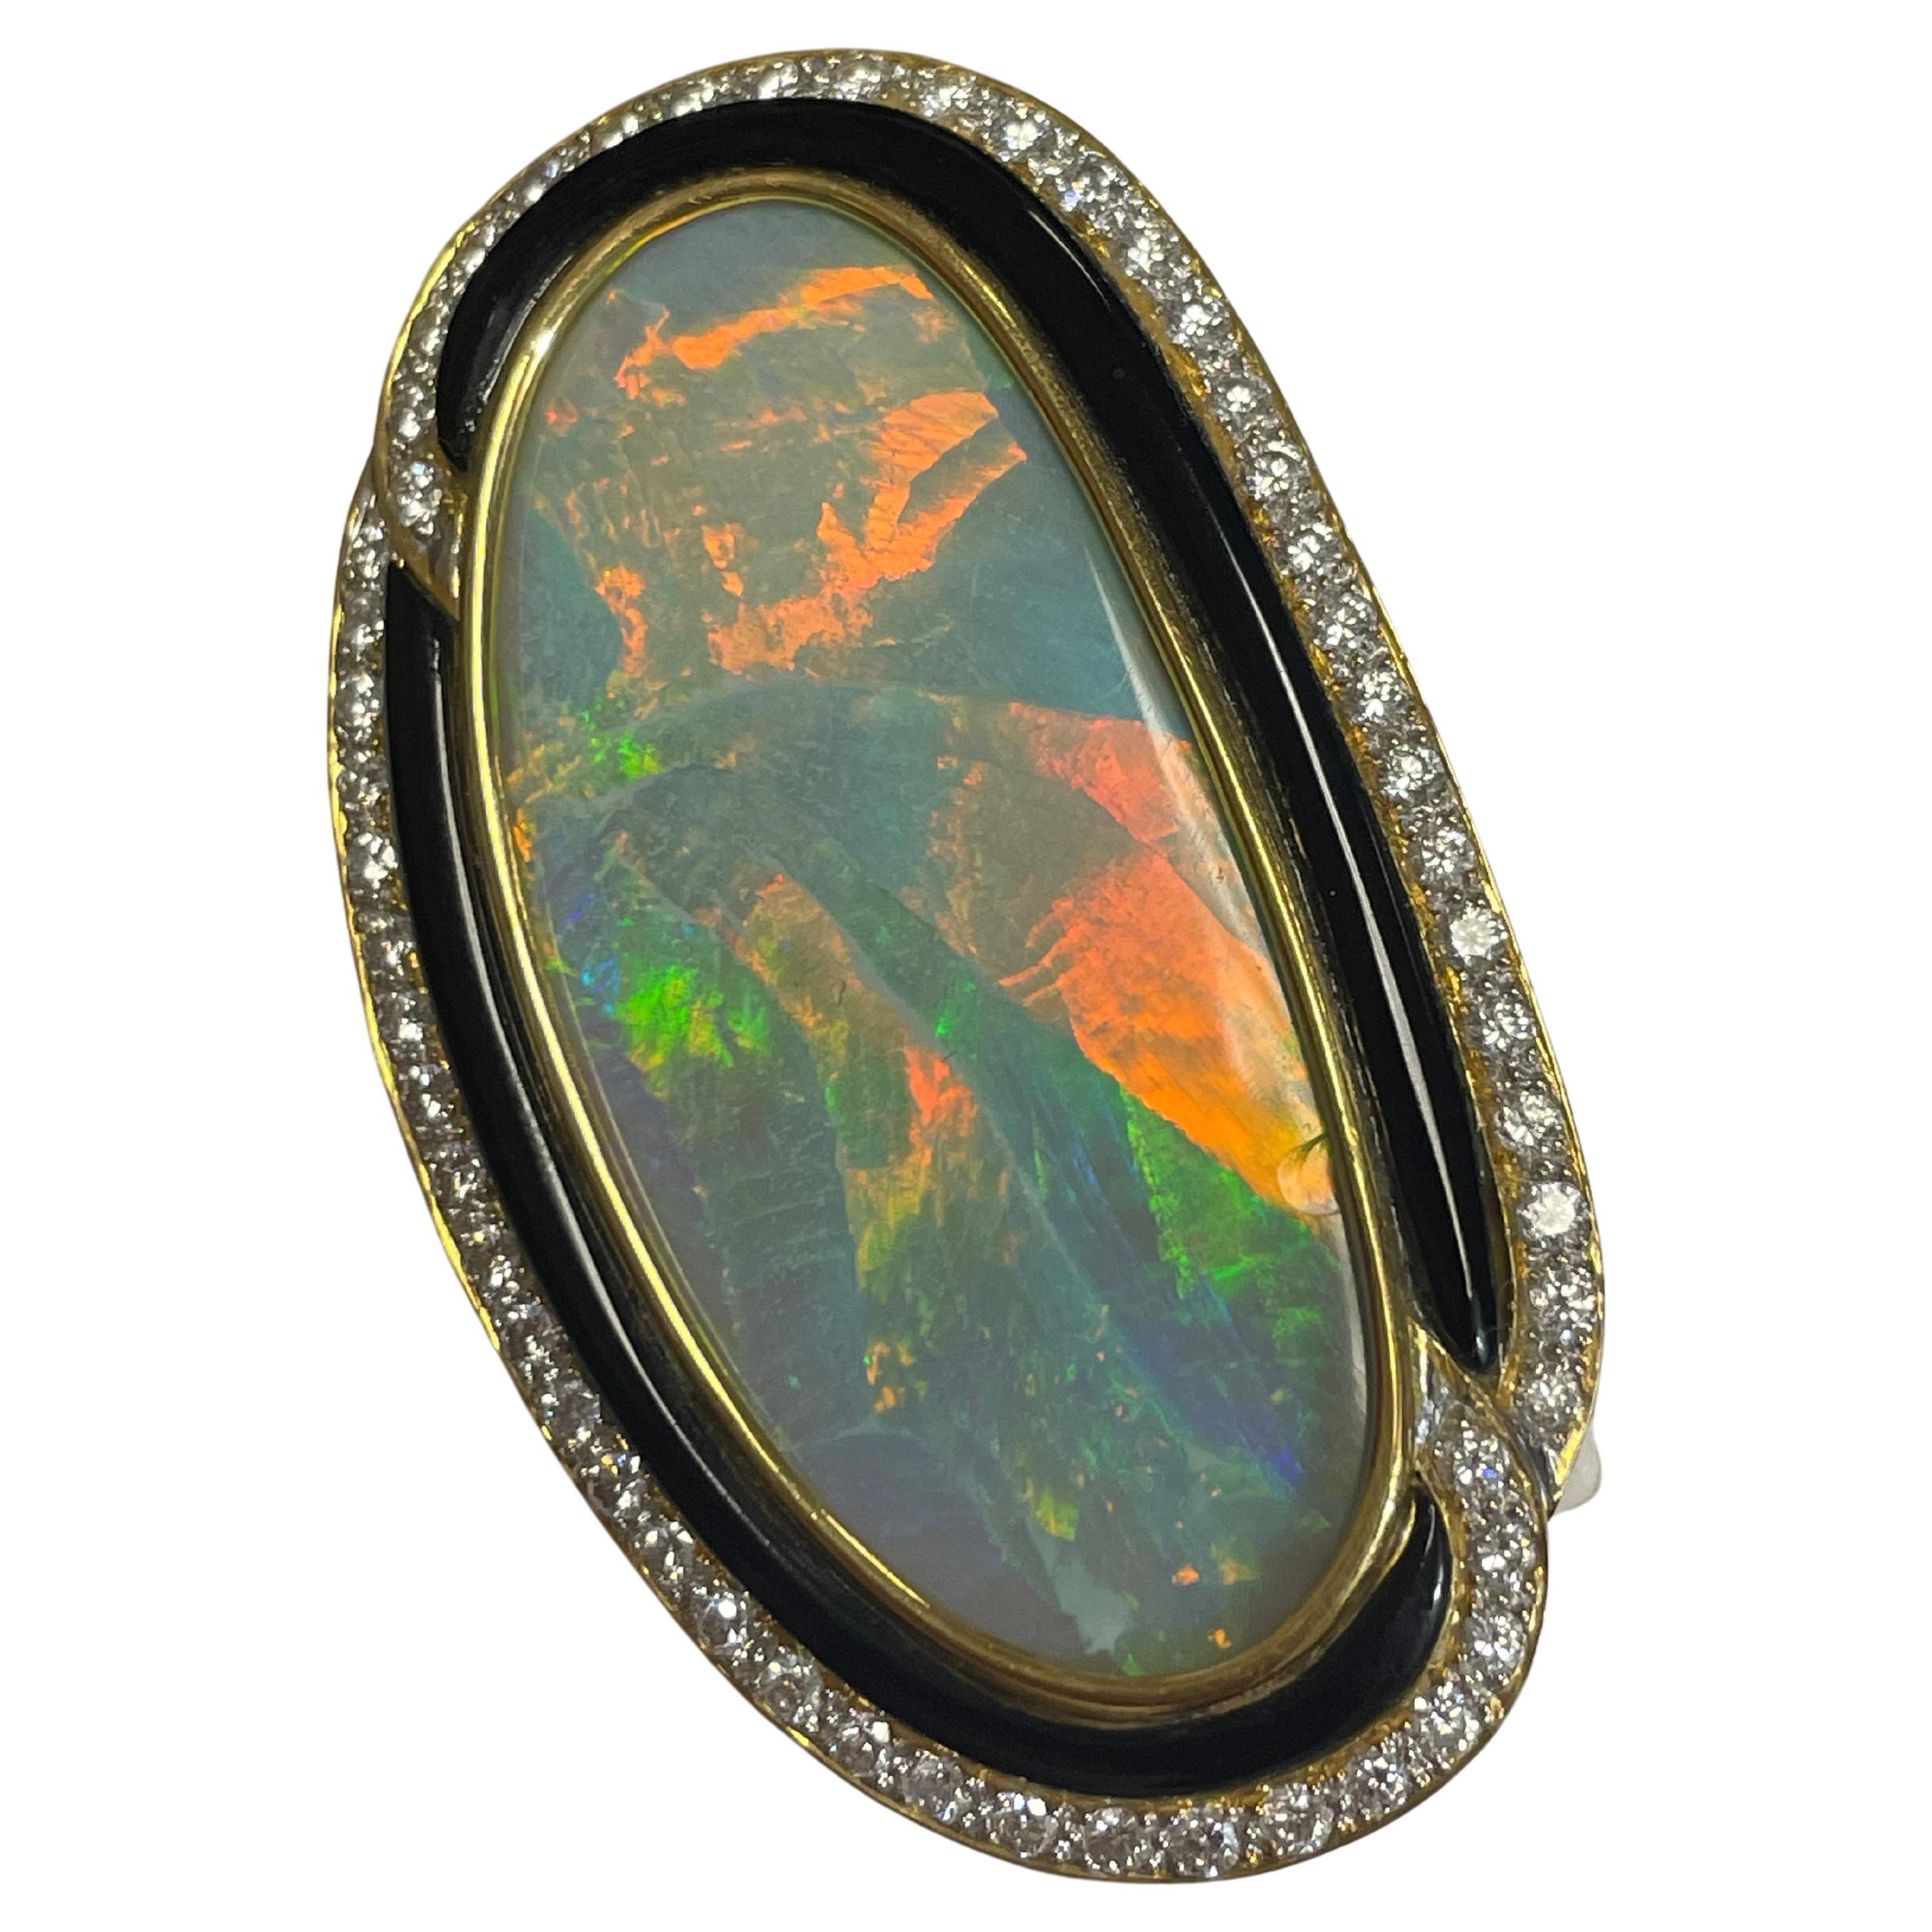 Mineable Boulder Opal, Diamonds, and Black Opal Broach in 18k Yellow Gold 